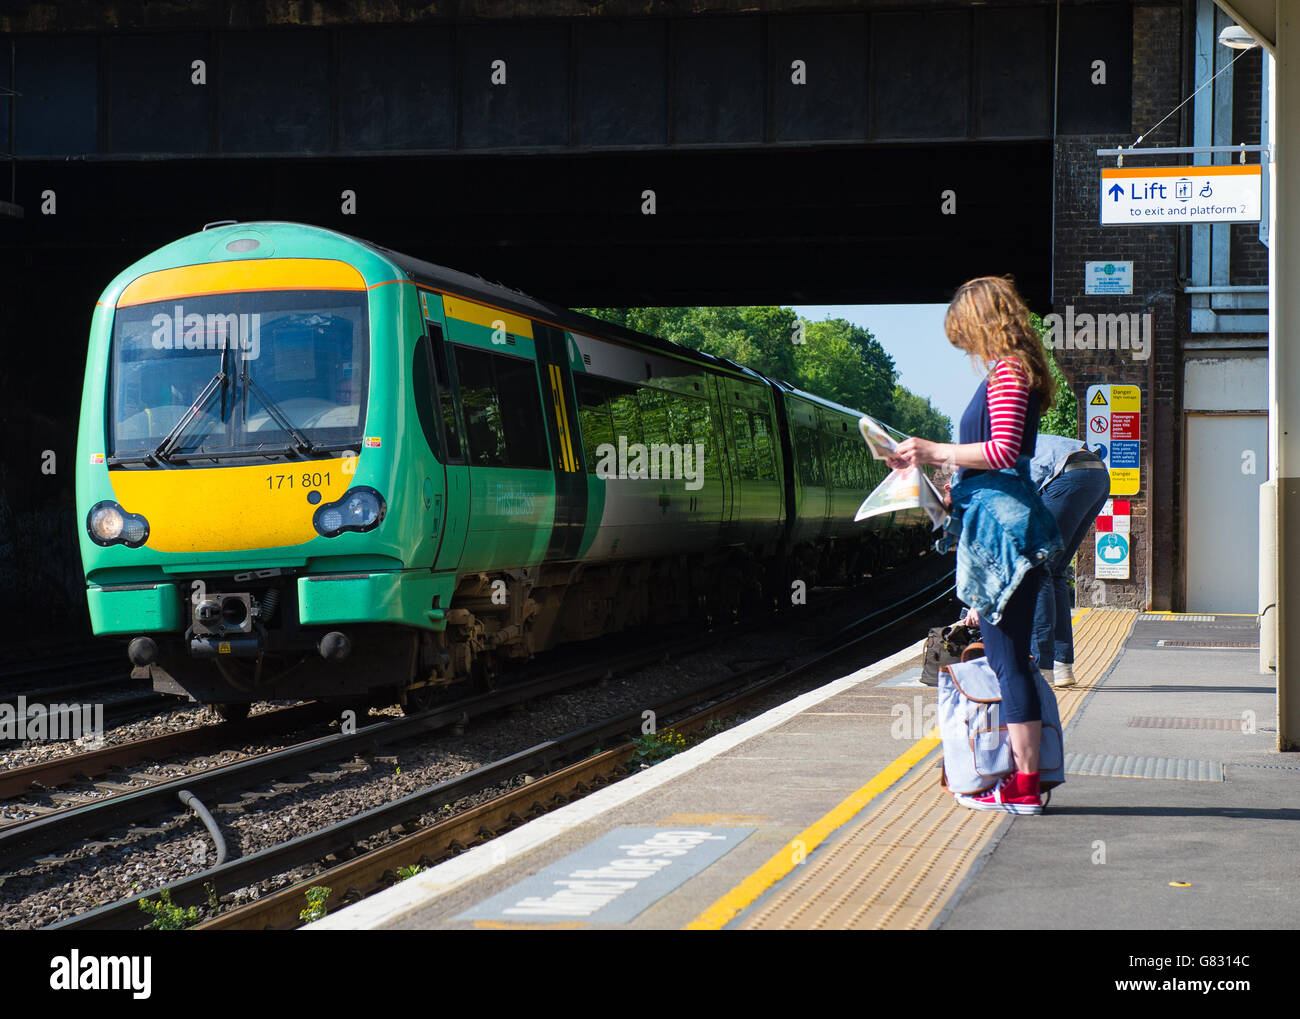 A Southern rail train at Honor Oak Park station, in London. Stock Photo